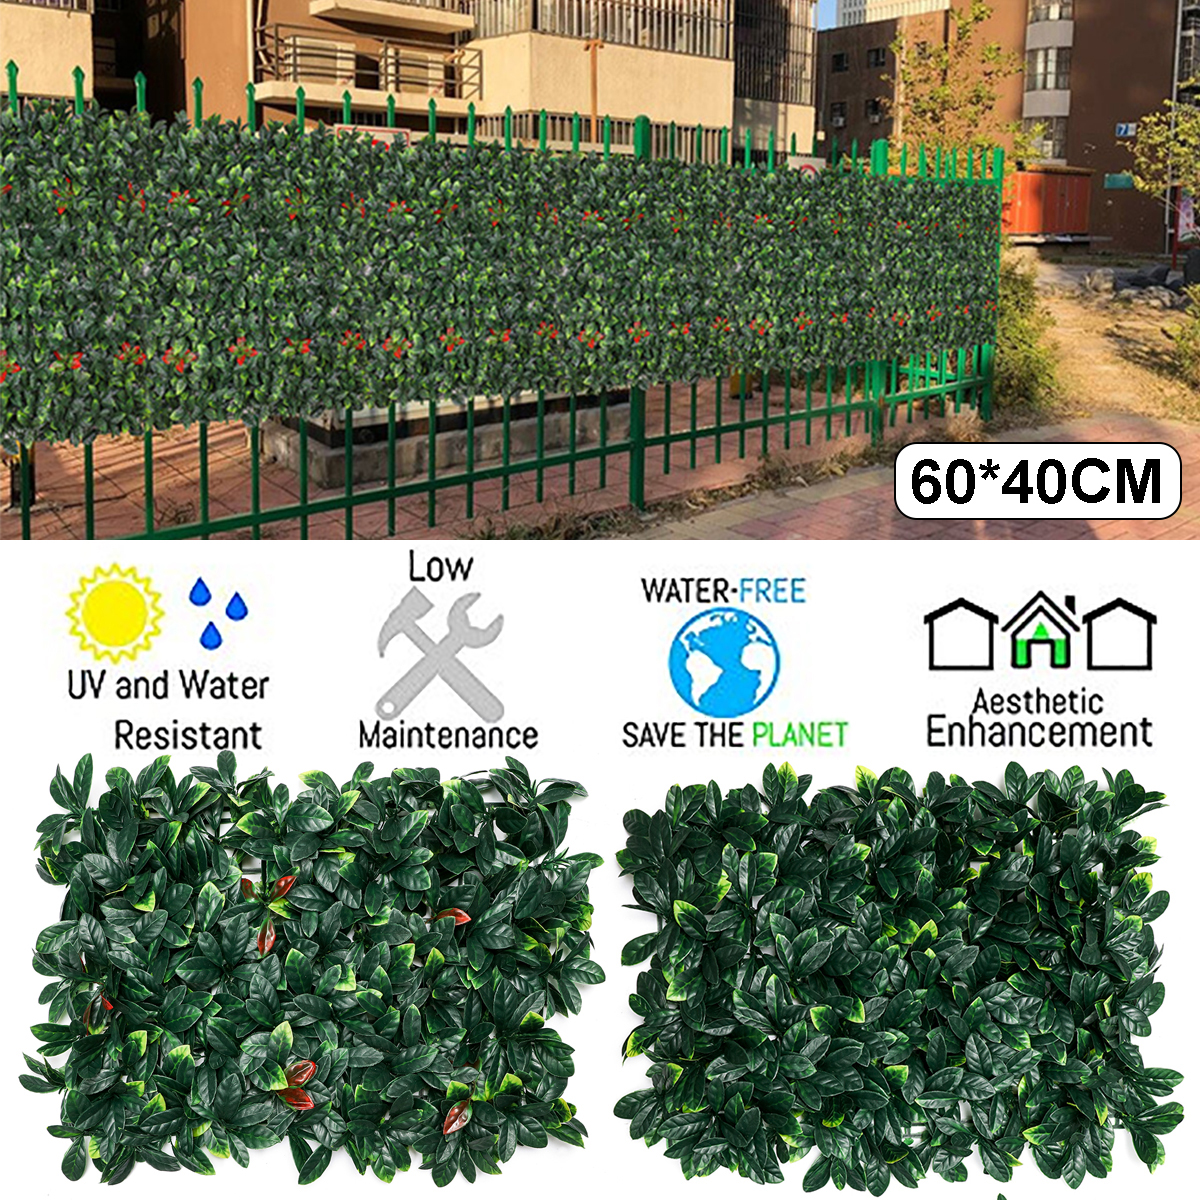 4060CM-Artificial-Topiary-Hedges-Panels-Plastic-Faux-Shrubs-Fence-Mat-Greenery-Wall-Backdrop-Decor-G-1729461-3